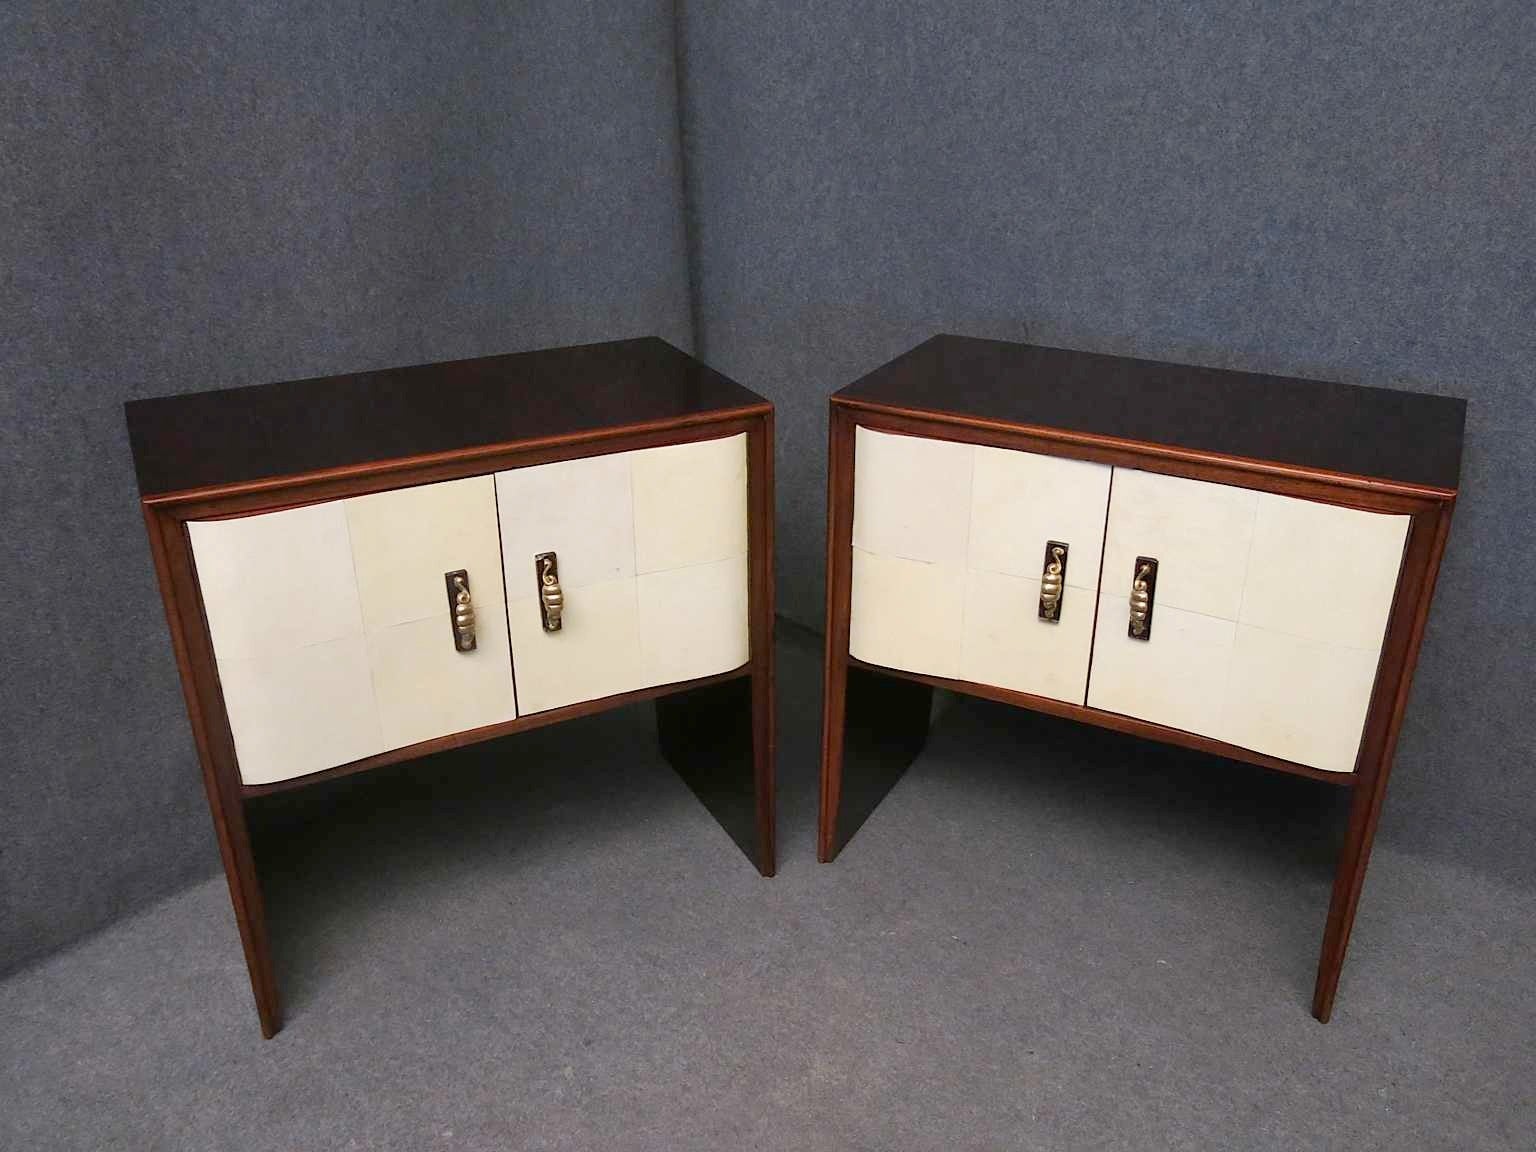 Couple of 1940s Parchment and Walnut Art Deco Nightstands